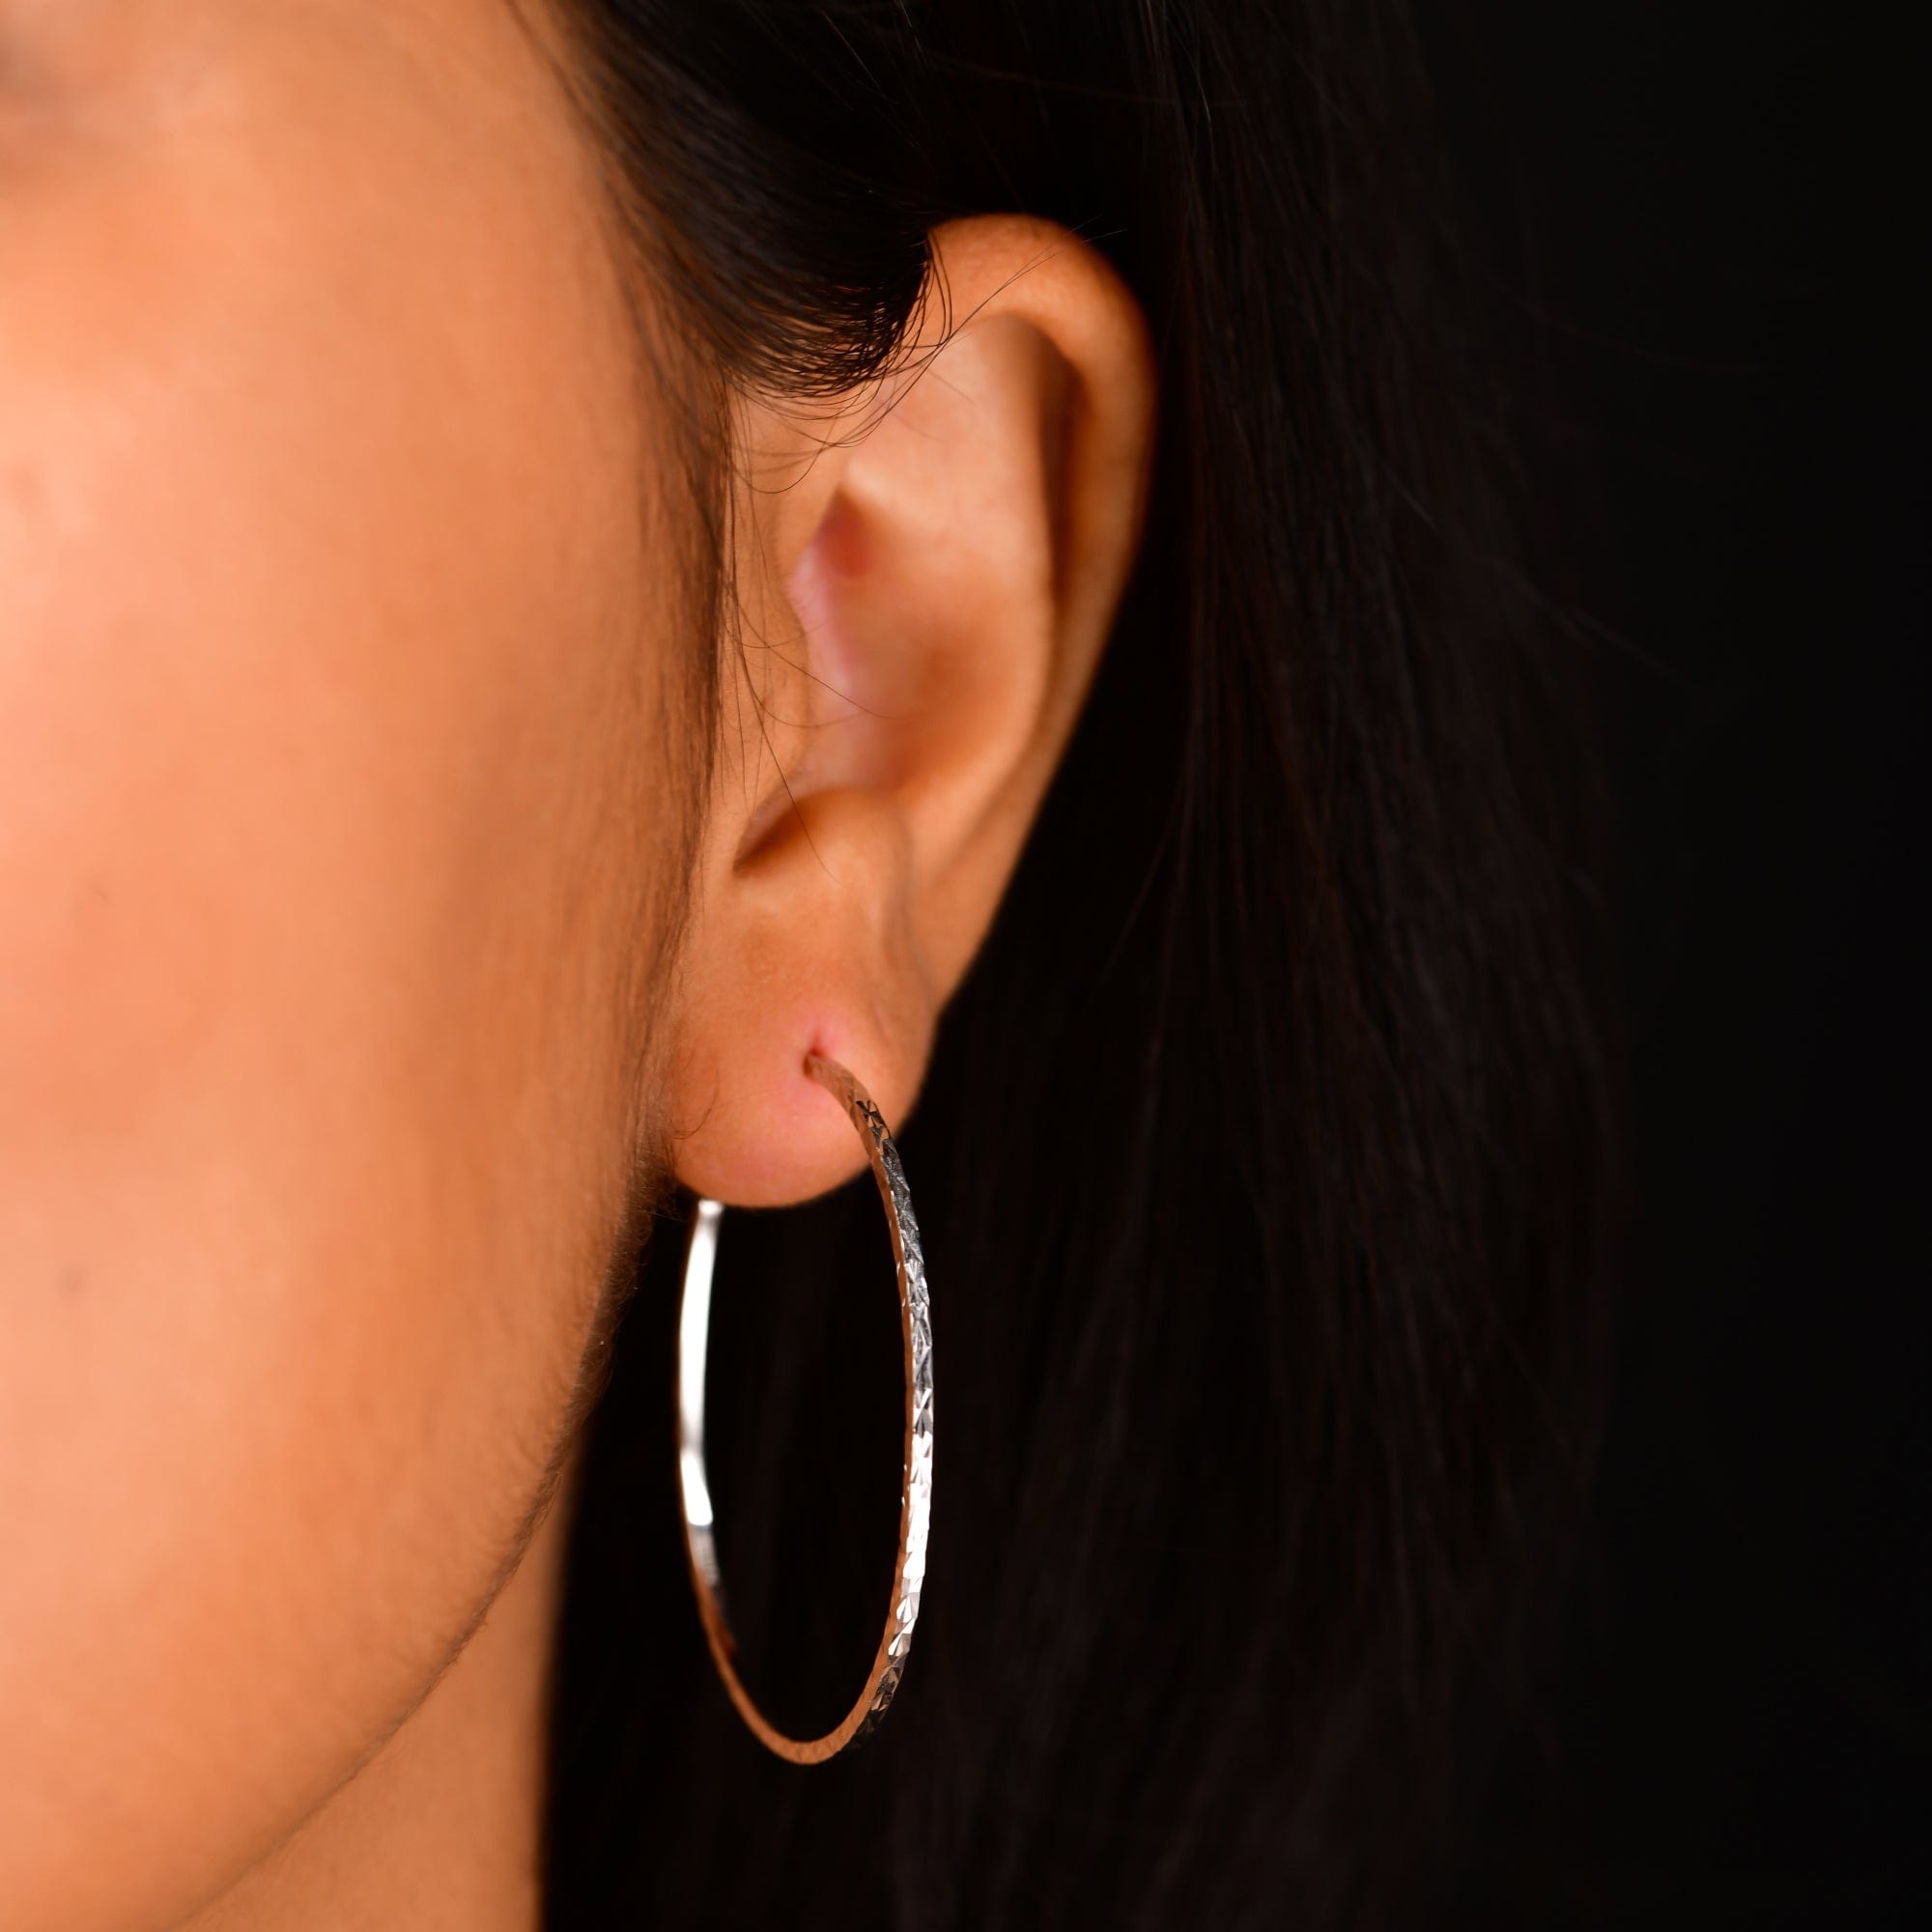 Shop Elegant 925 Sterling Silver Bali Hoop Earrings | Perfect Addition to  Your Jewelry Collection